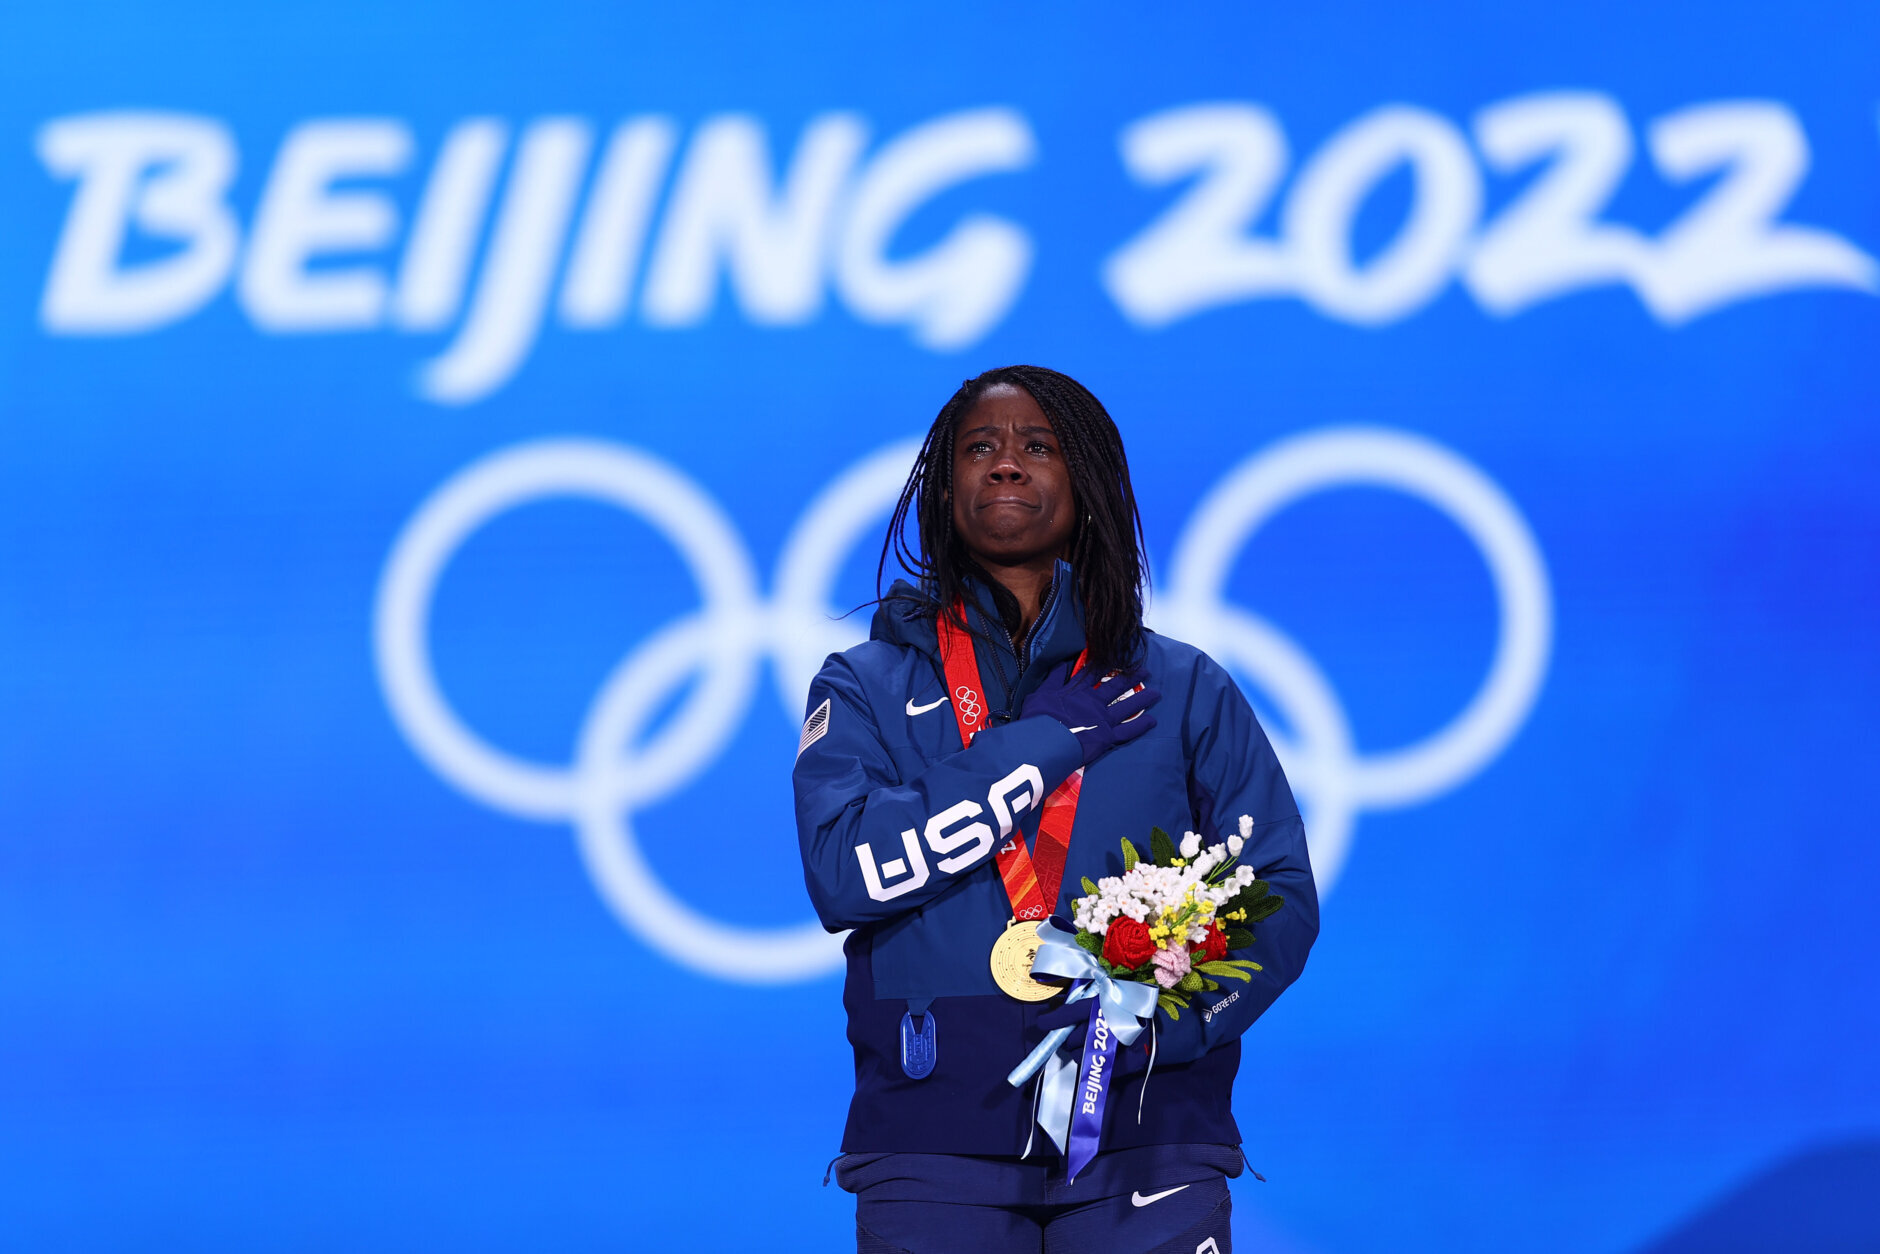 BEIJING, CHINA - FEBRUARY 14: Gold medallist Erin Jackson of Team United States reacts during the Women's 500m medal ceremony on Day 10 of the Beijing 2022 Winter Olympics at Medal Plaza on February 14, 2022 in Beijing, China. (Photo by Dean Mouhtaropoulos/Getty Images)